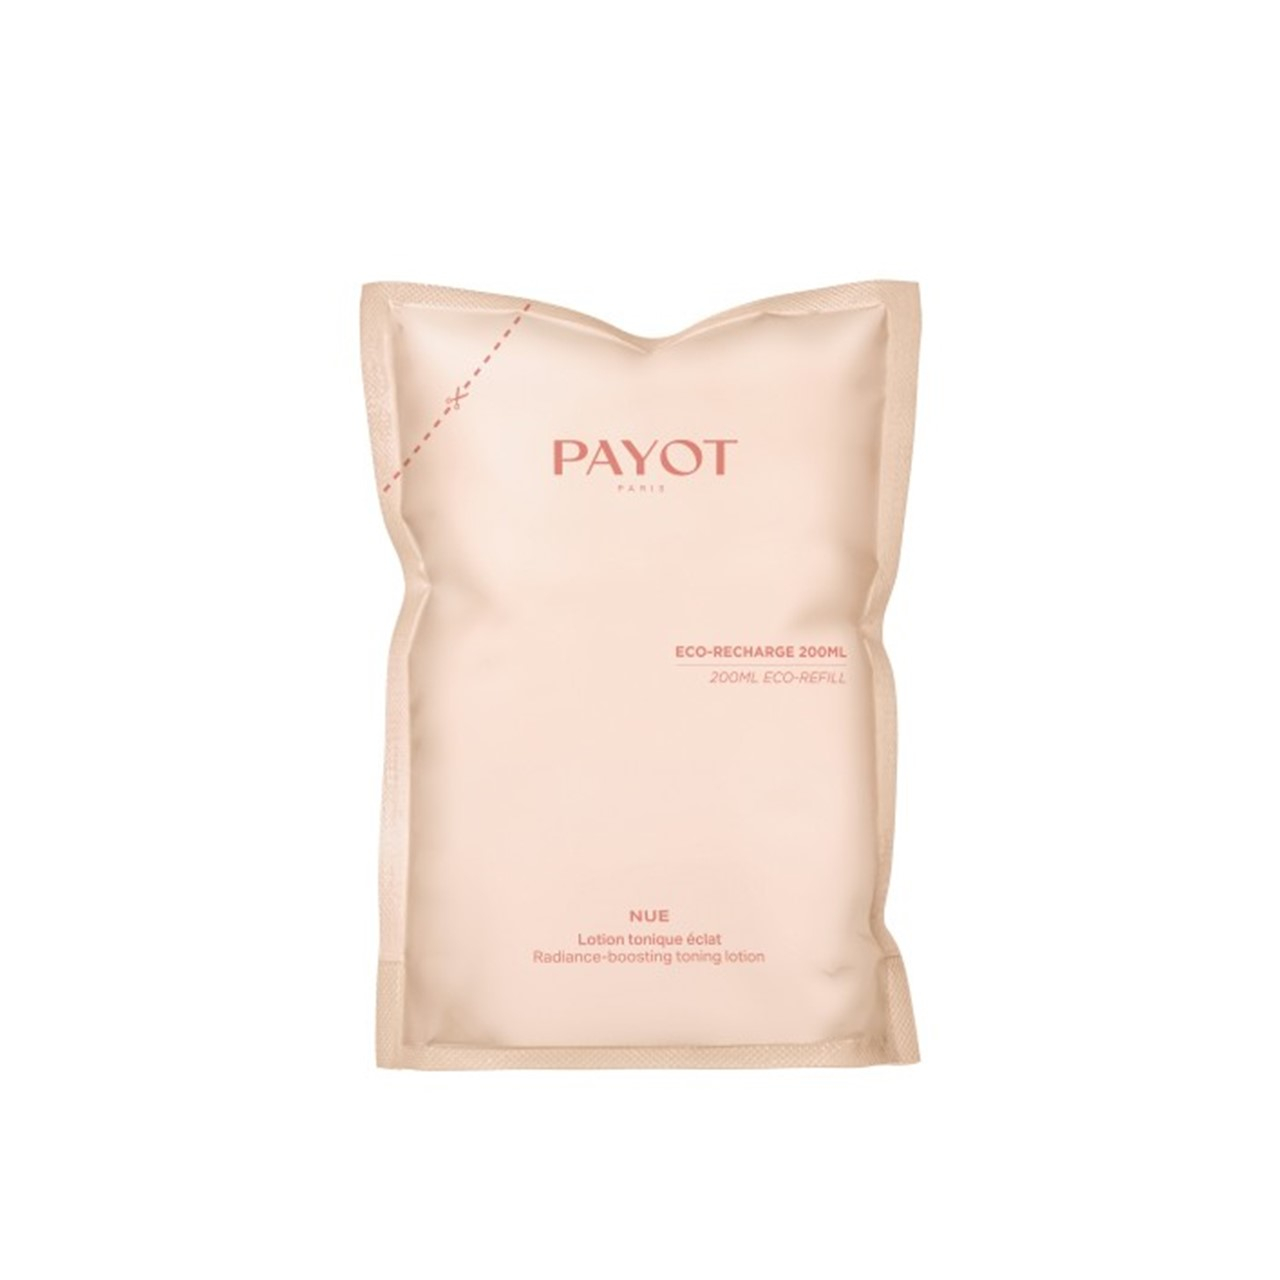 Payot Nue Radiance-Boosting Toning Lotion Eco-Refill 200ml (6.7 fl oz)